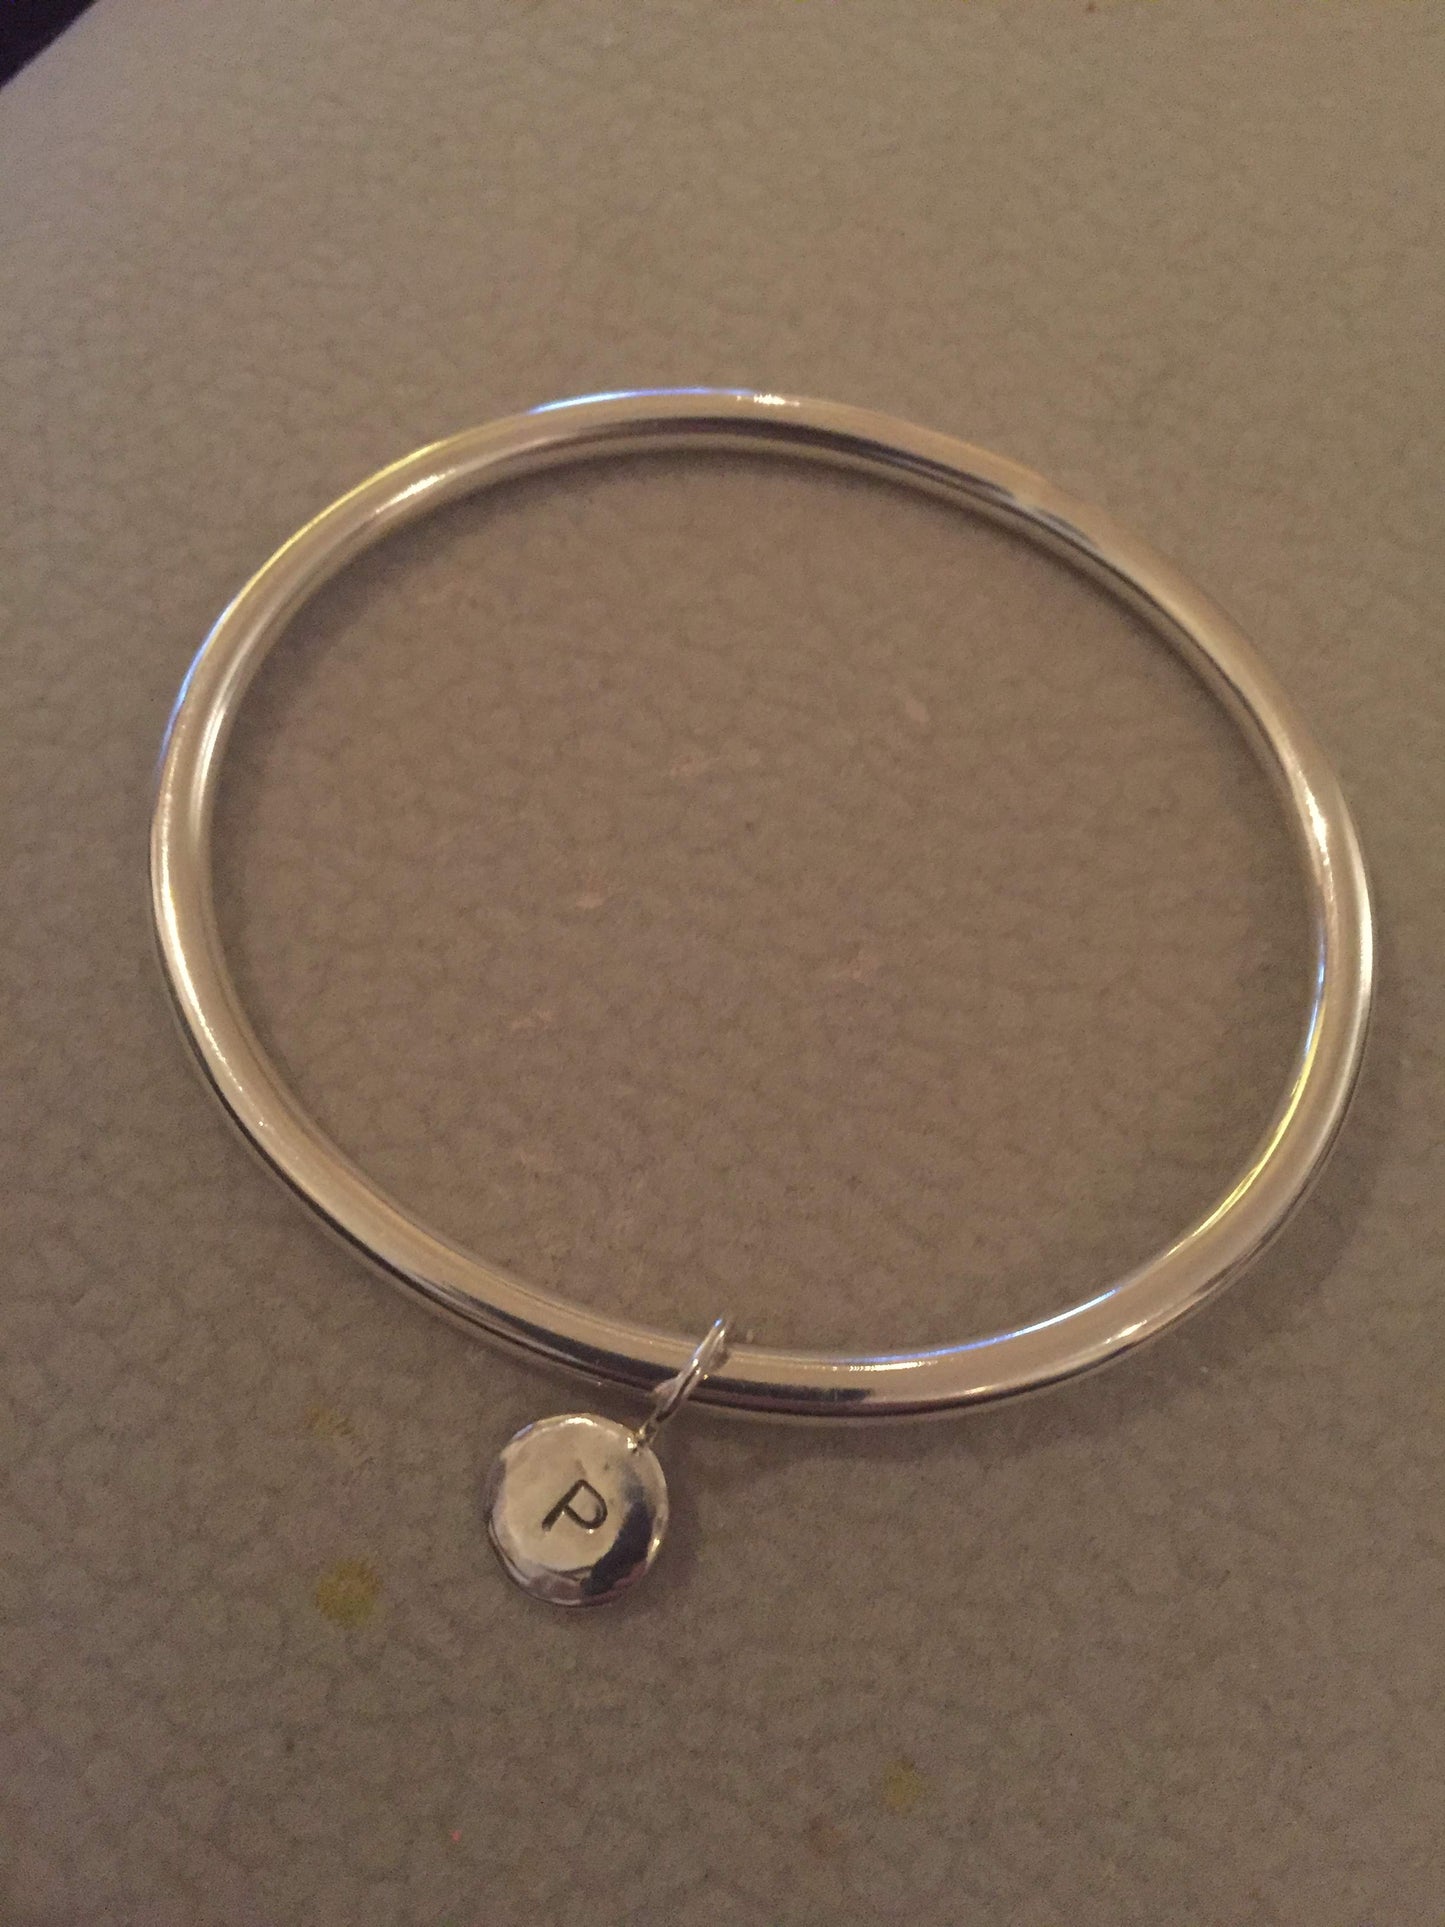 solid handmade 925 sterling silver bangle with silver disc and the initial P secured with a secure sterling silver closed jump ring